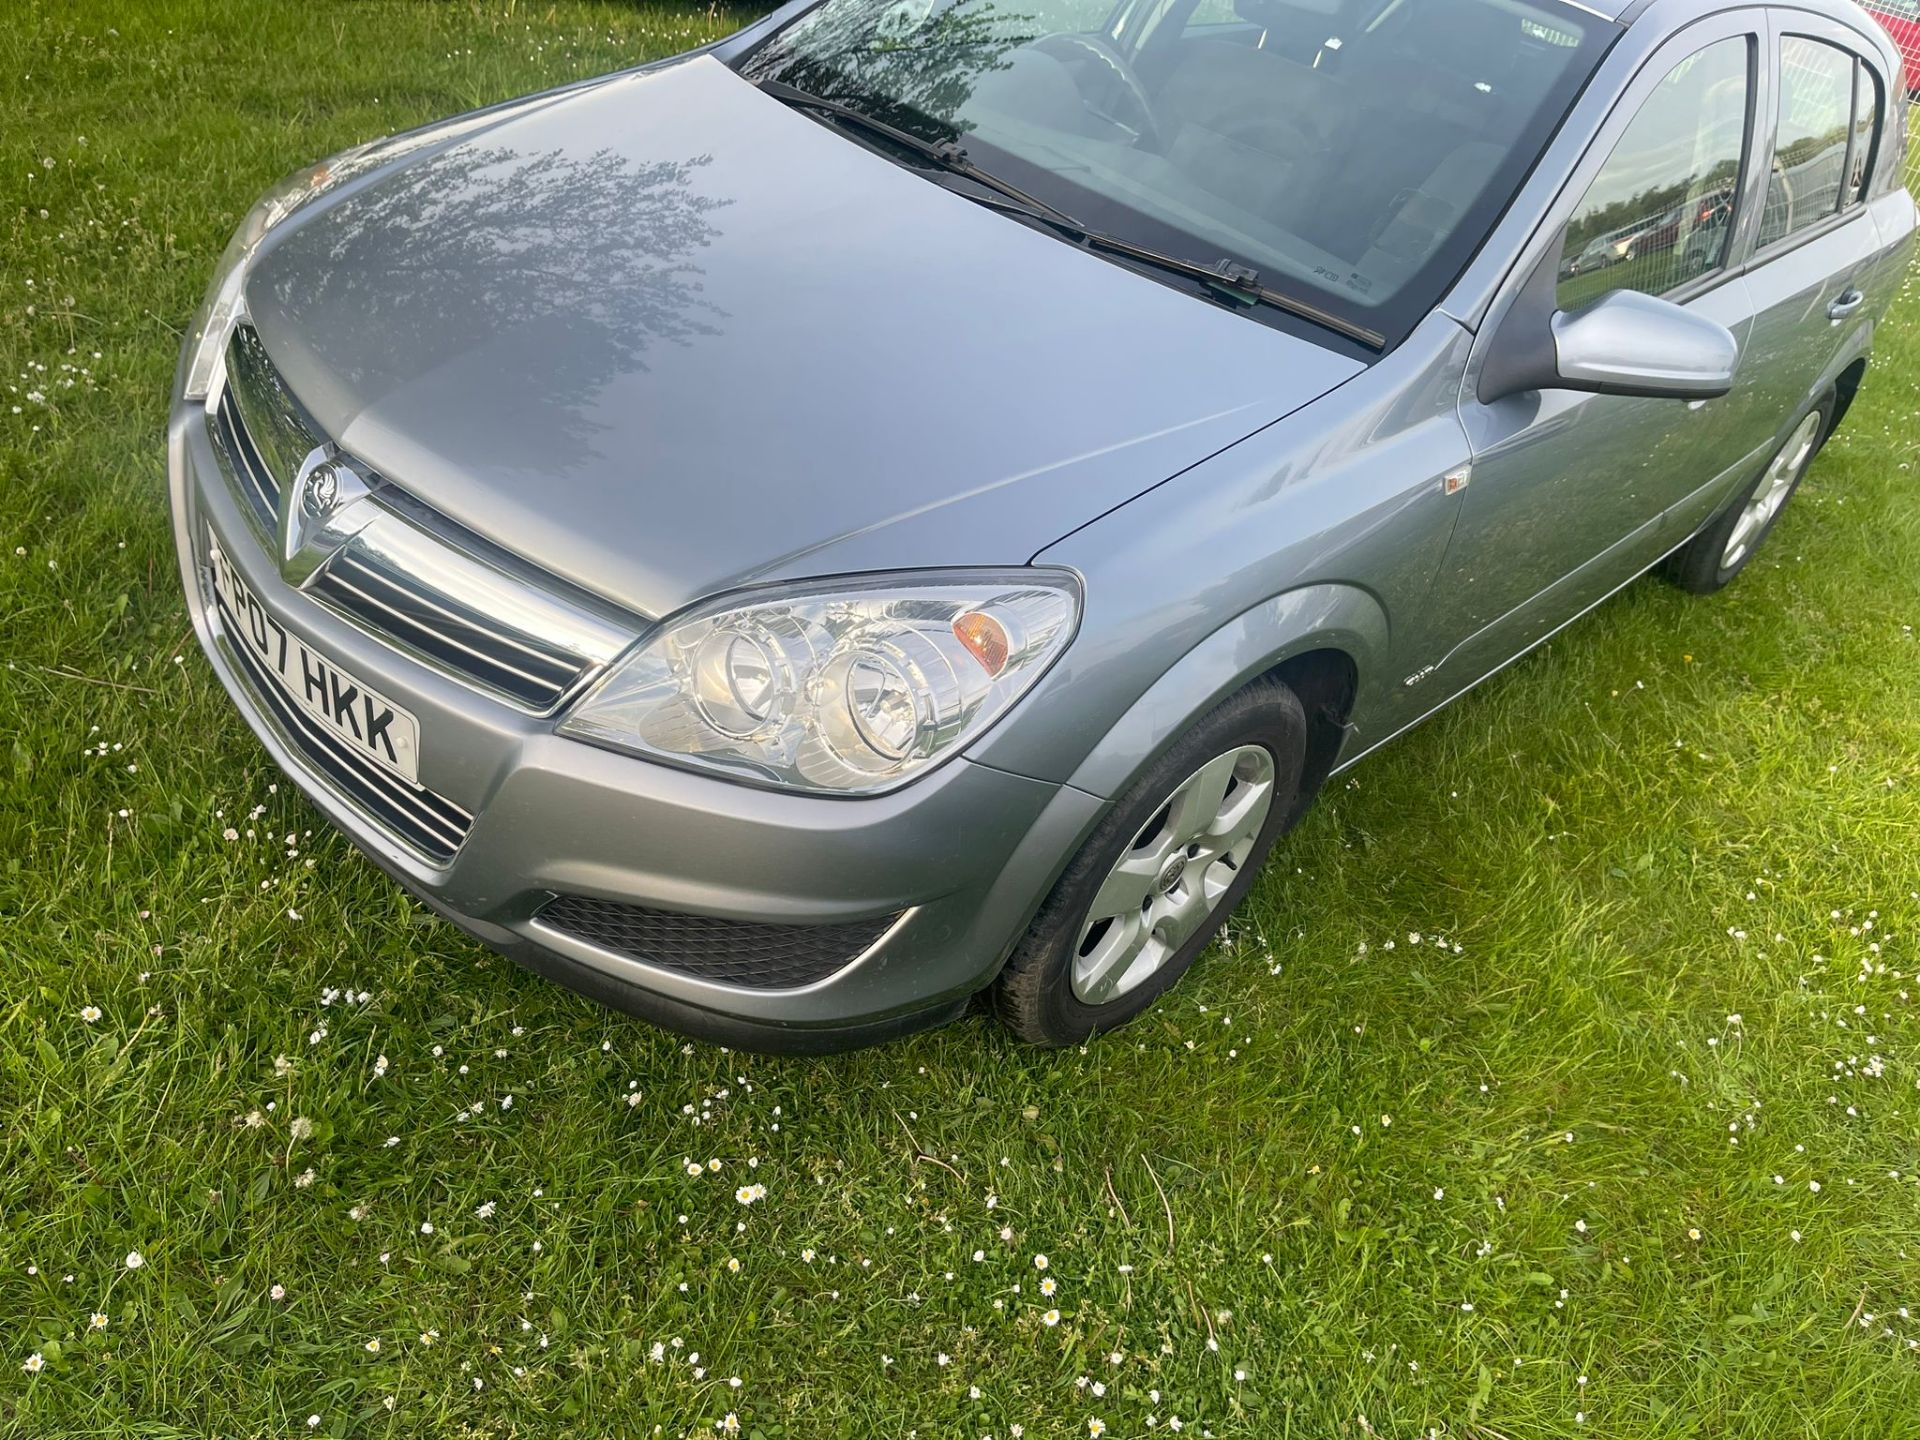 2007/07 REG VAUXHALL ASTRA CLUB TWINPORT 1.4 PETROL MANUAL HATCHBACK, SHOWING 2 FORMER KEEPERS - Image 2 of 7